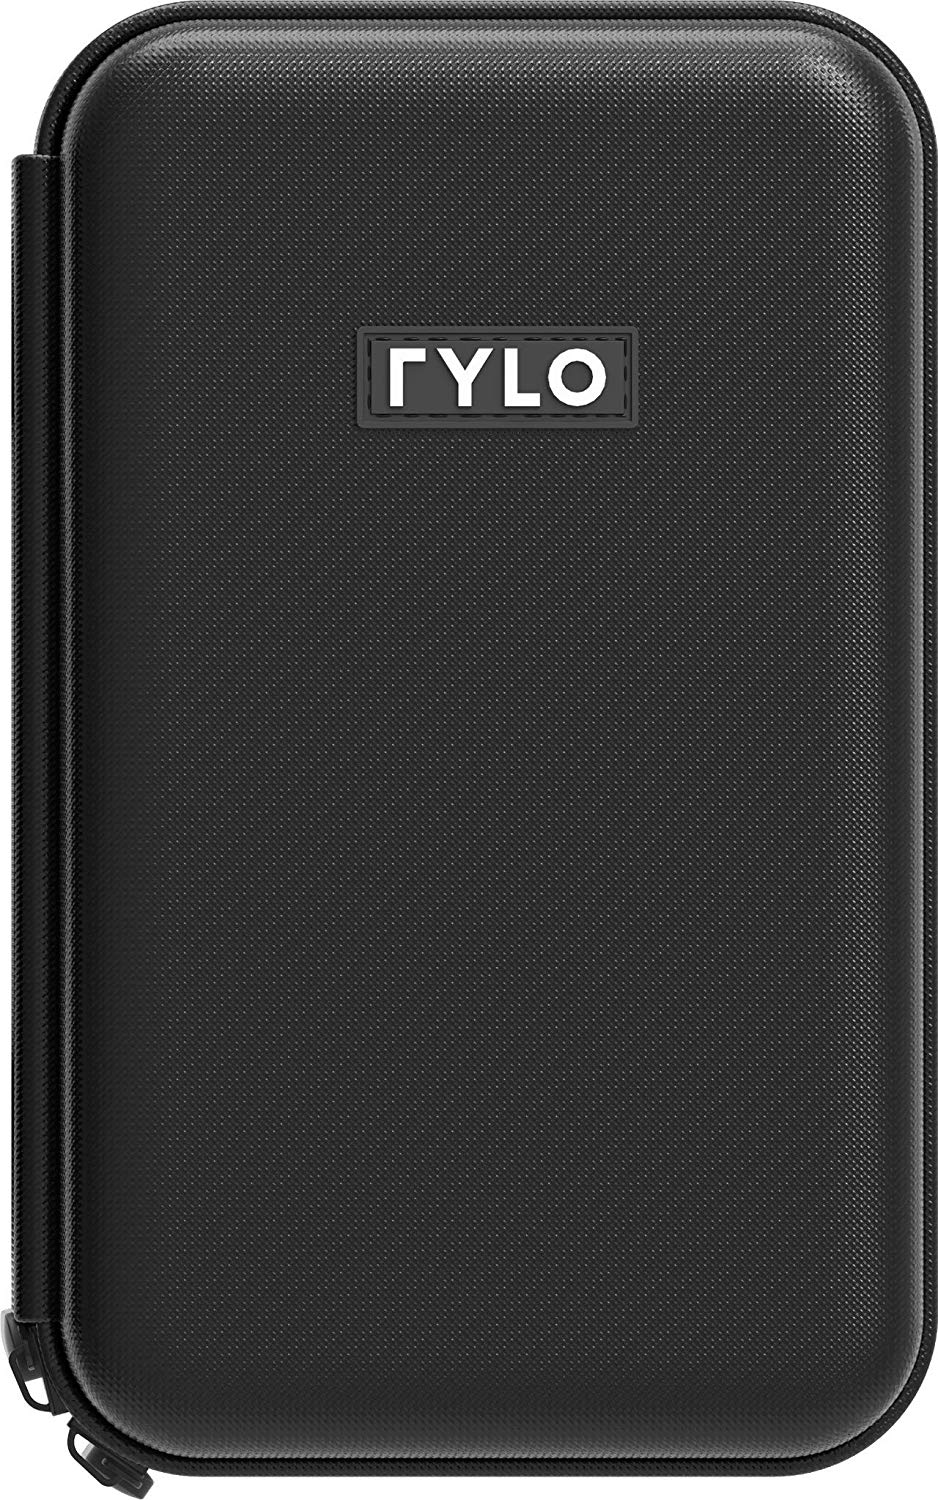 Rylo Carrying Case for 360 Video Camera Carrying Case Camera Case, Black (A0113) 1